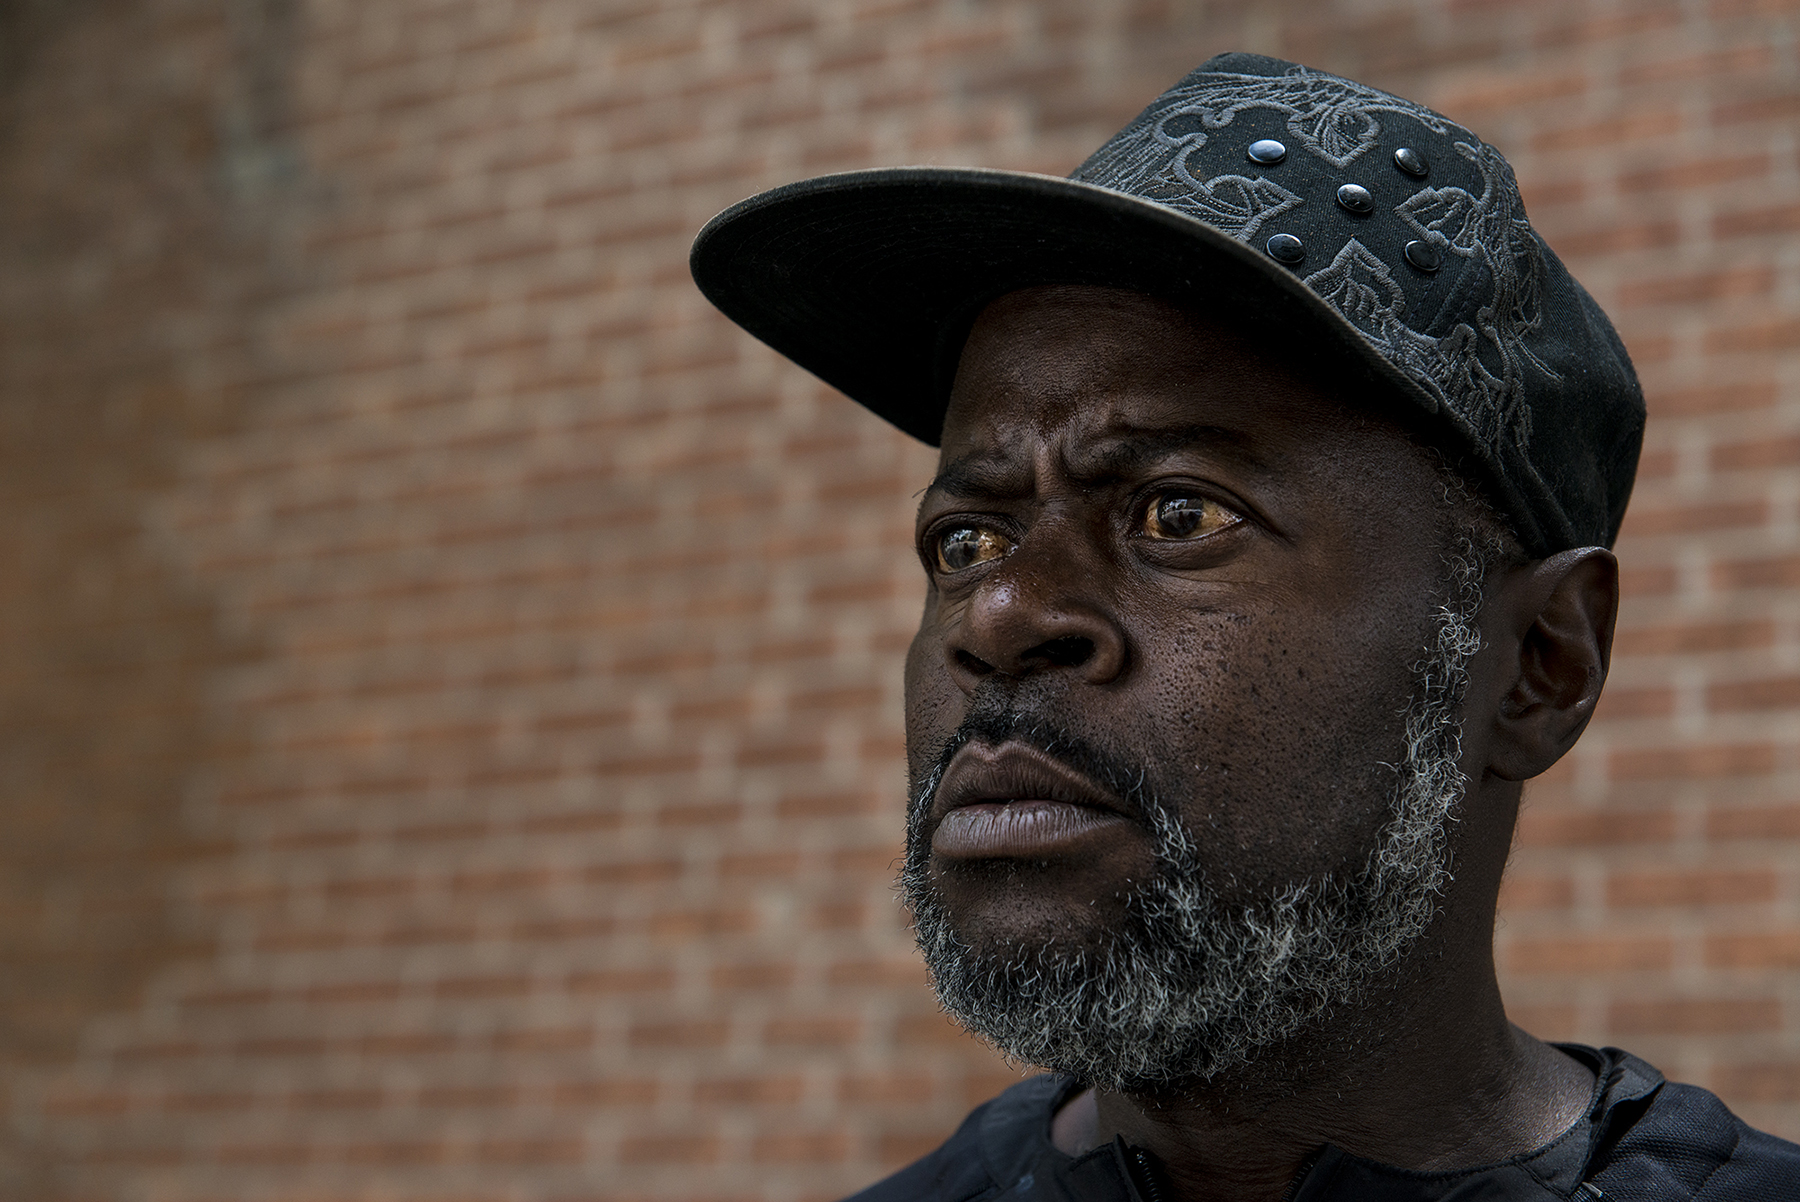 Duane Ronald Neal, 57, is a resident of the West End, a low-income neighborhood in downtown Cincinnati. He said shootings in the community have left voters disillusioned, especially among African-Americans. (Roman Knertser/News21)